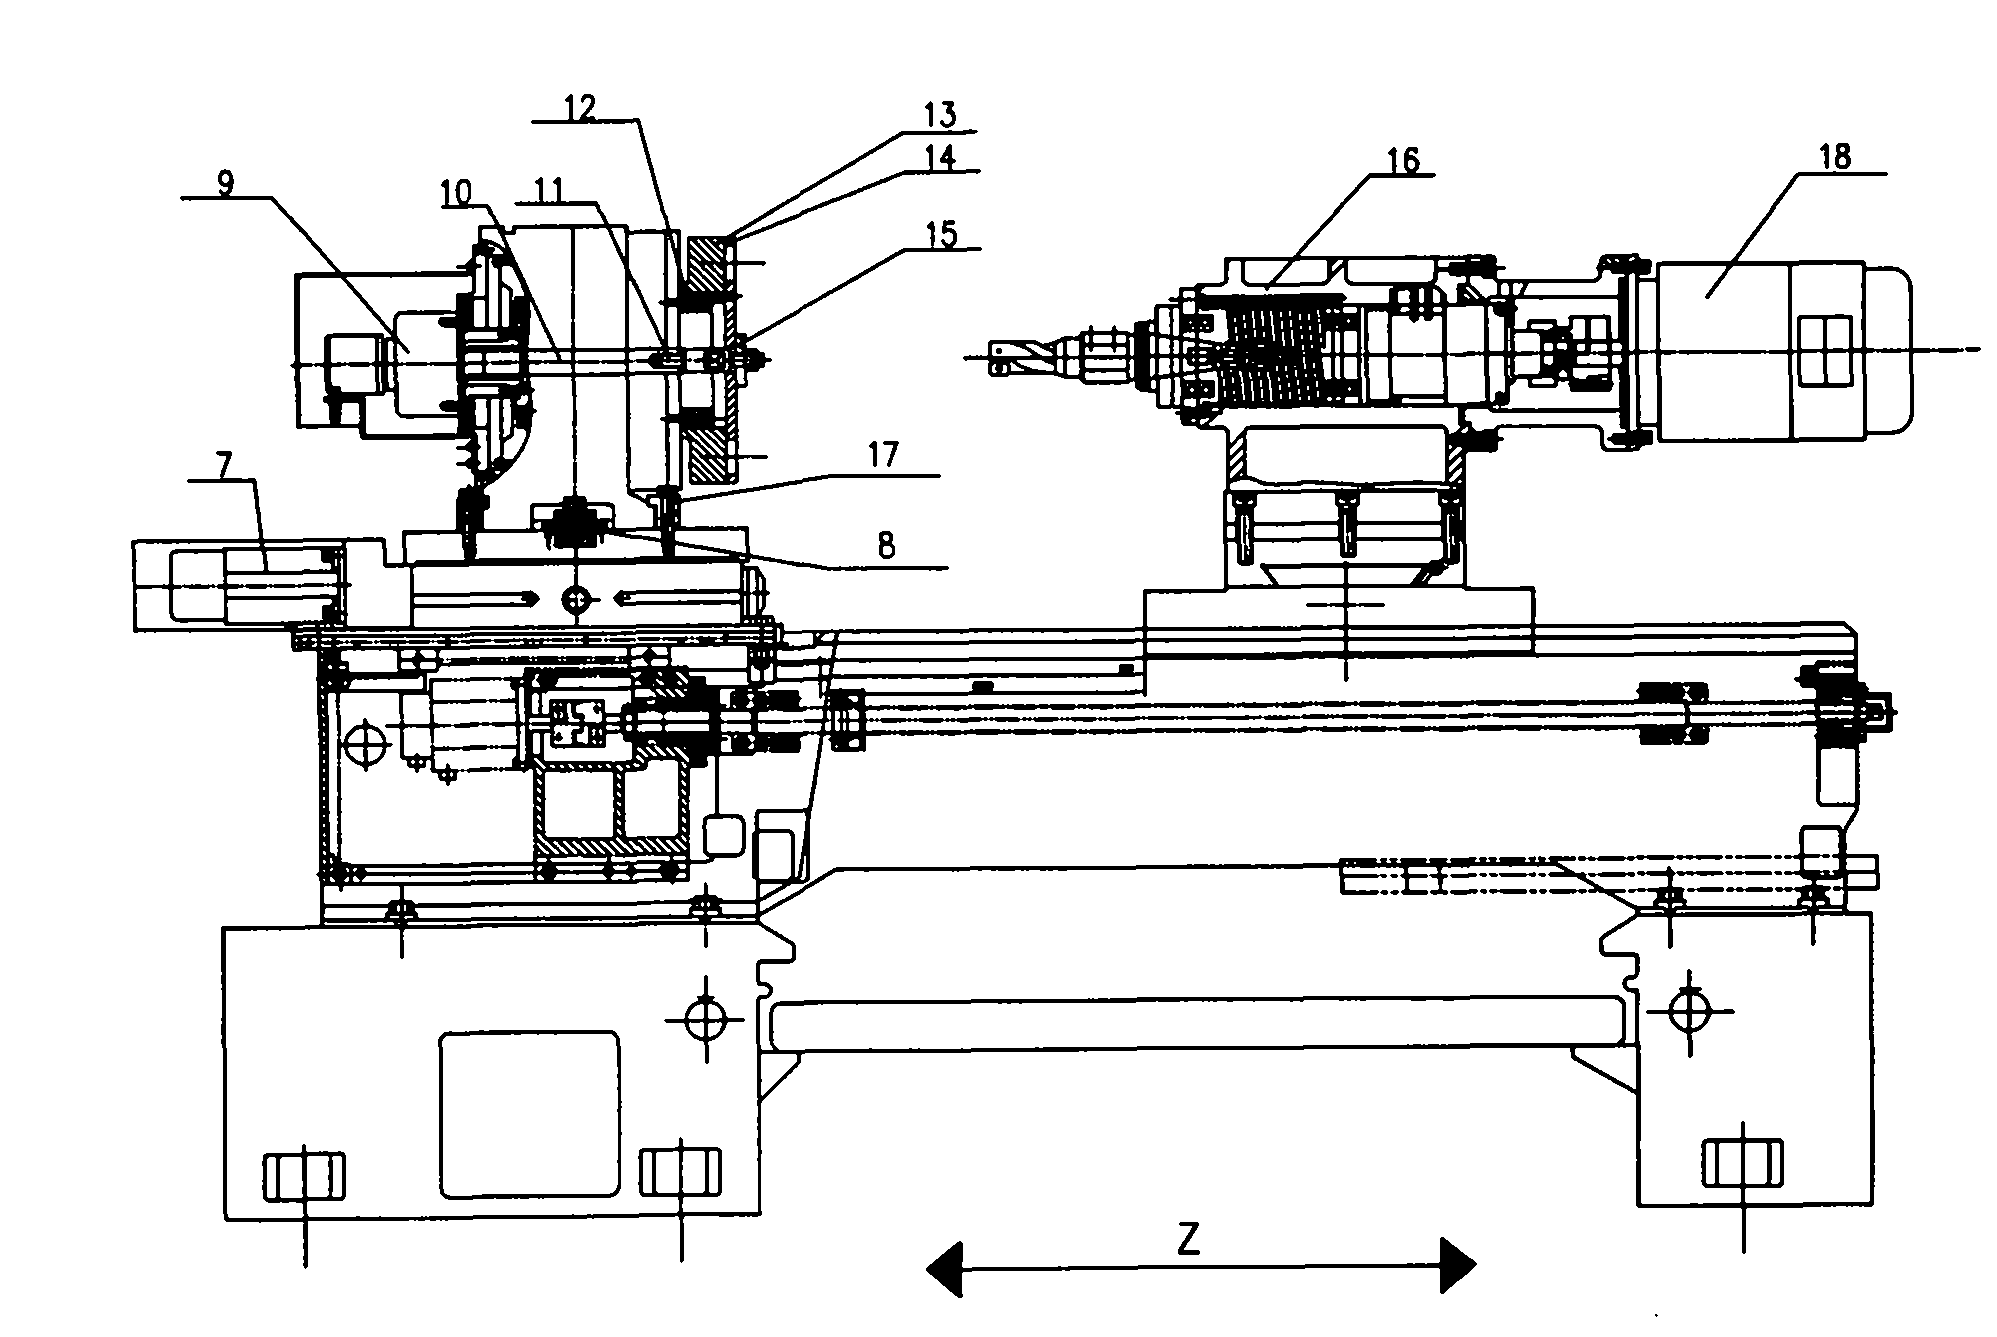 Numerical control machine tool for machining bearing retainer